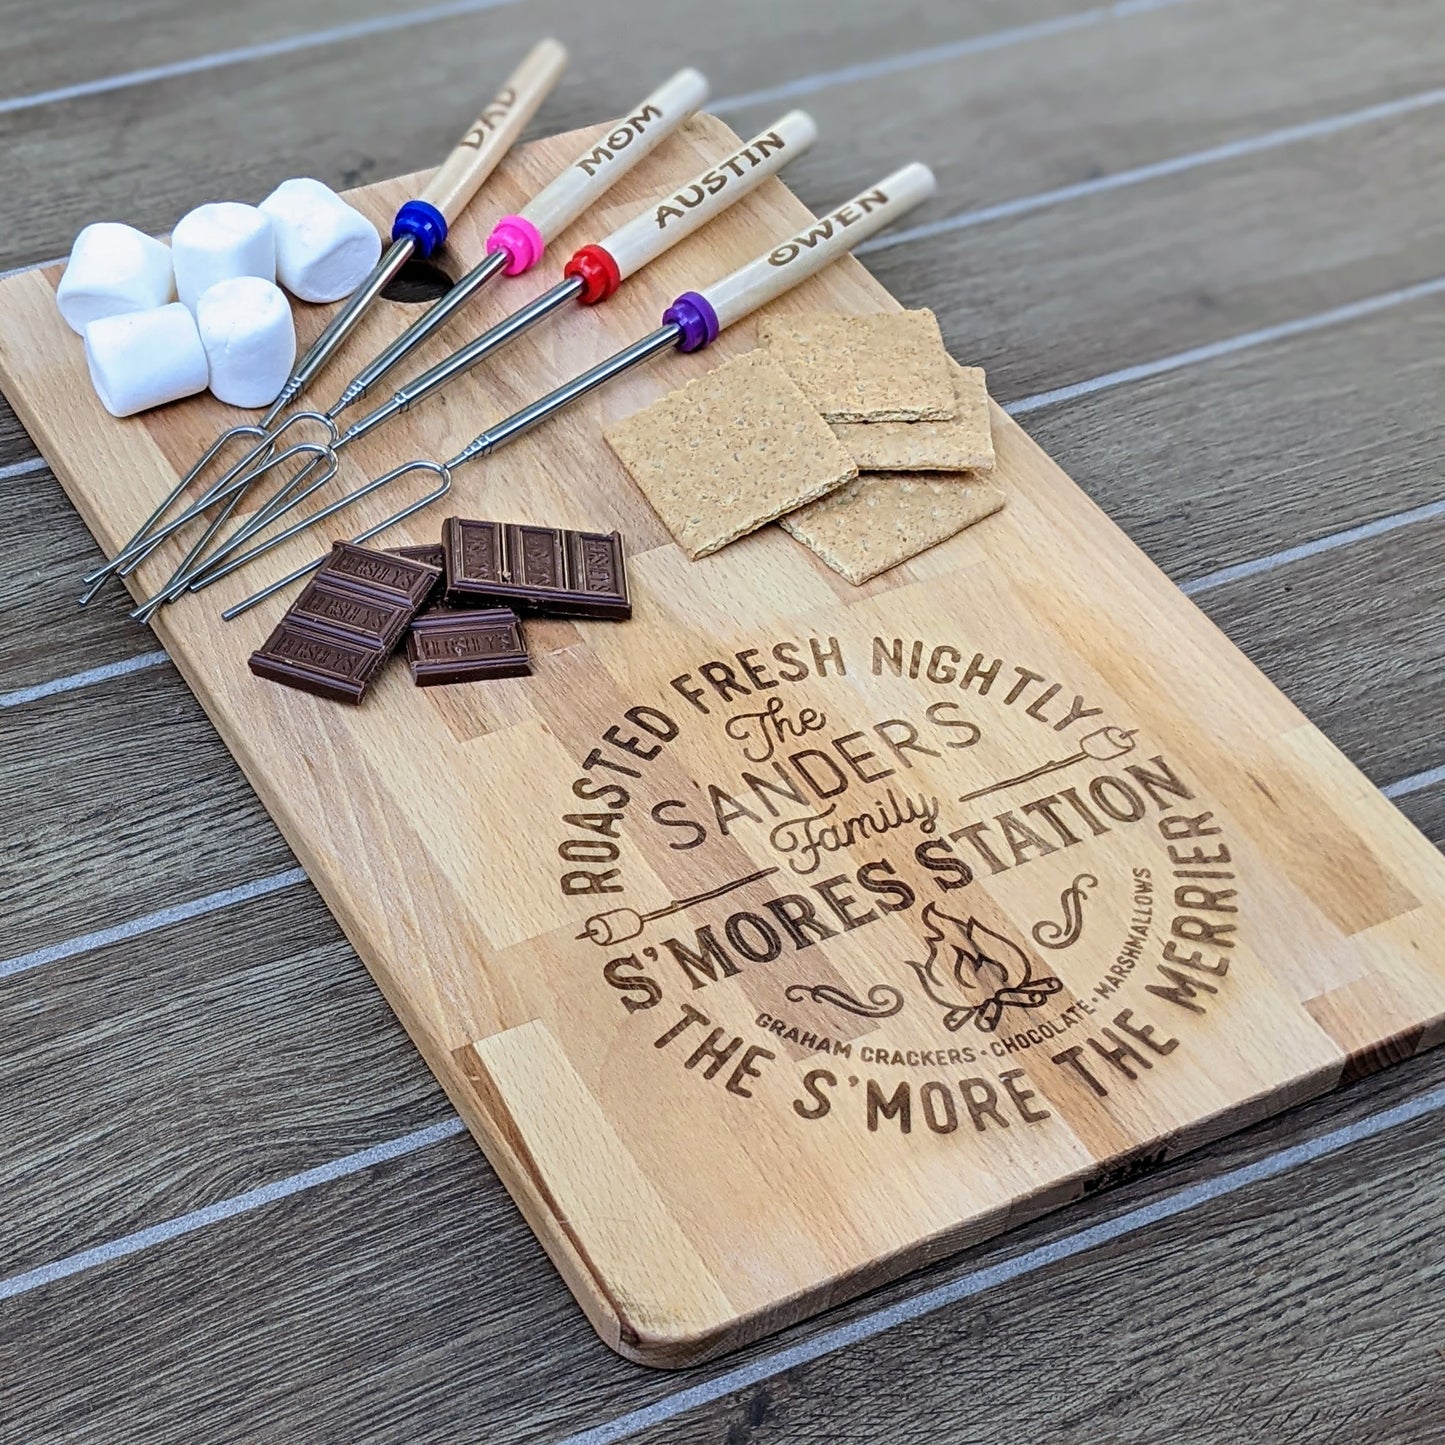 Roasted Fresh Nightly Personalized Wood Cutting Board with 4 Personalized Skewers!